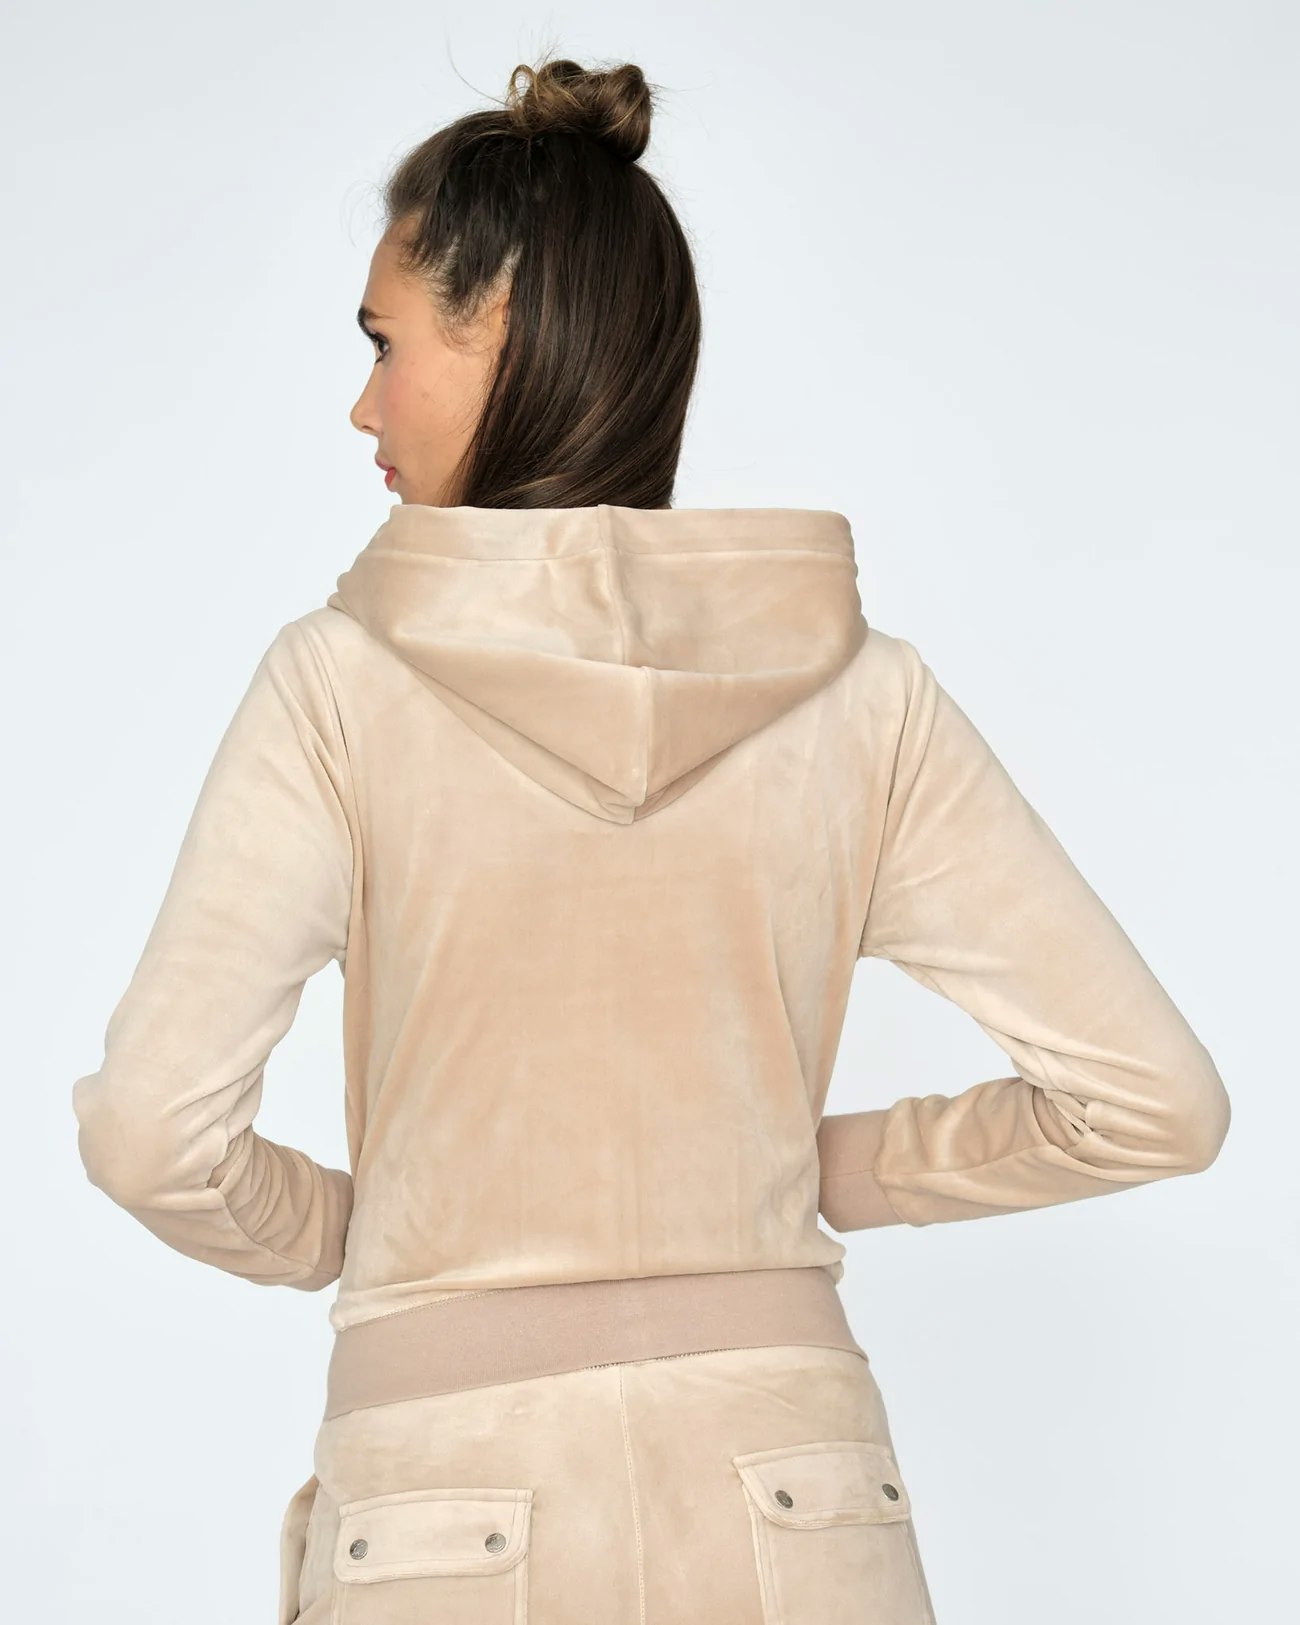 Juicy Couture - Classic Velour Robertson Zip Hoodie - Warm Taupe